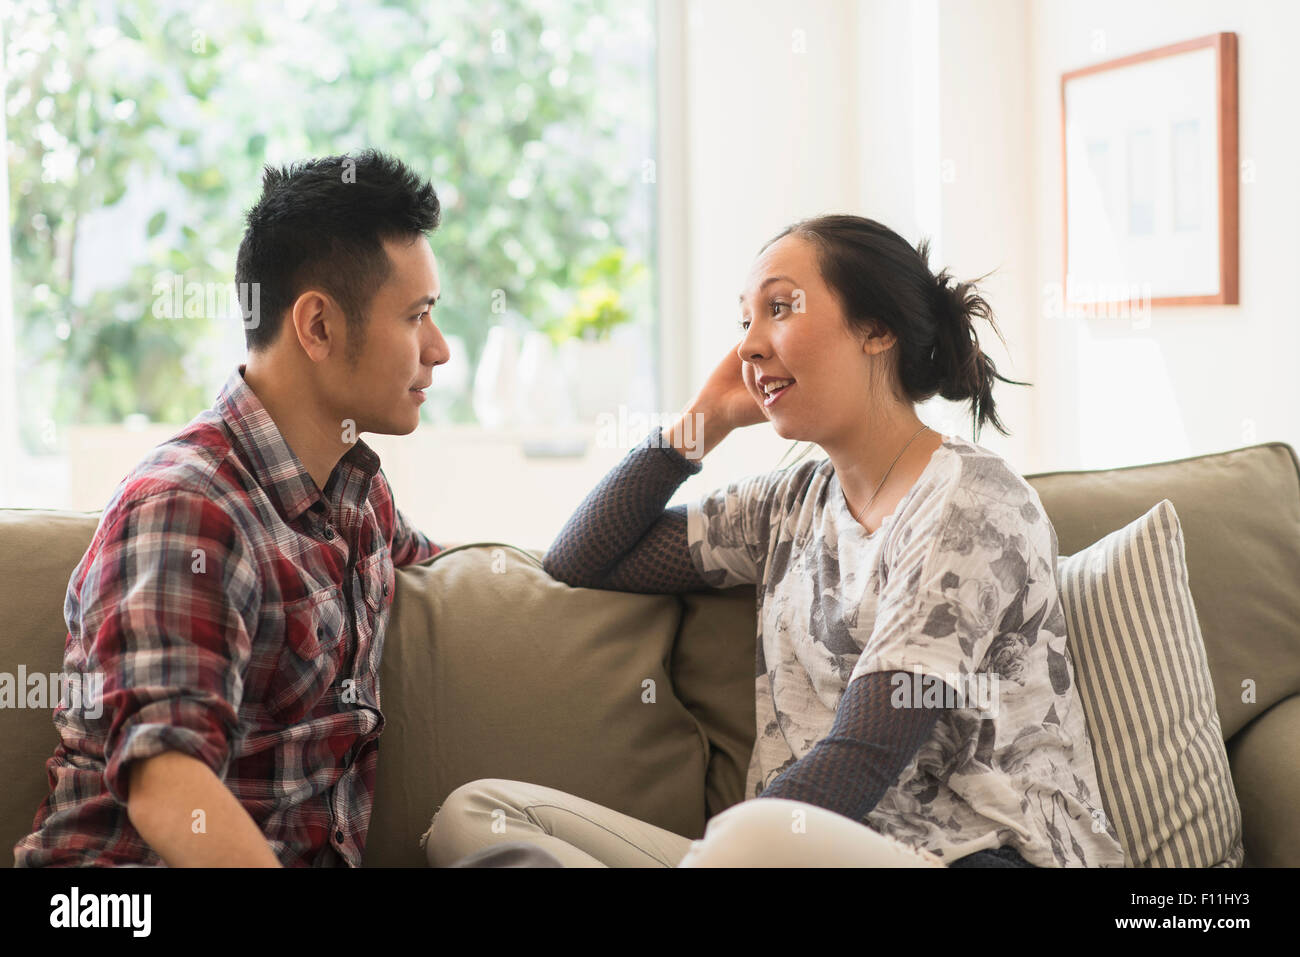 Couple talking on sofa in living room Banque D'Images